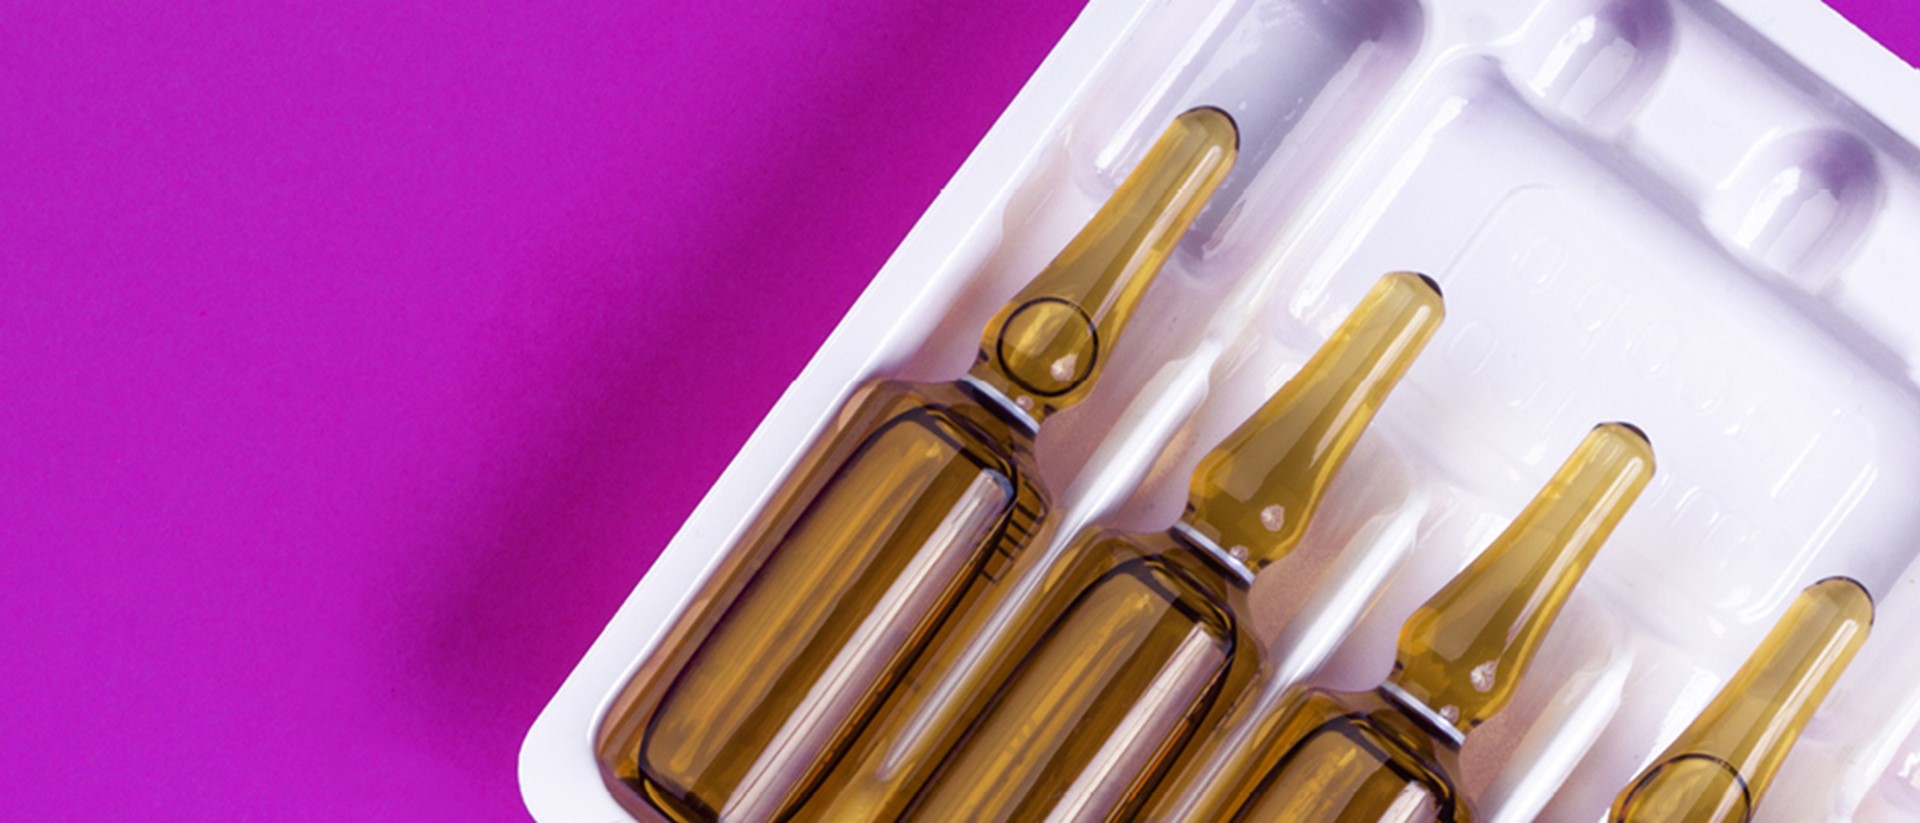 Image of glass vials on a pink background